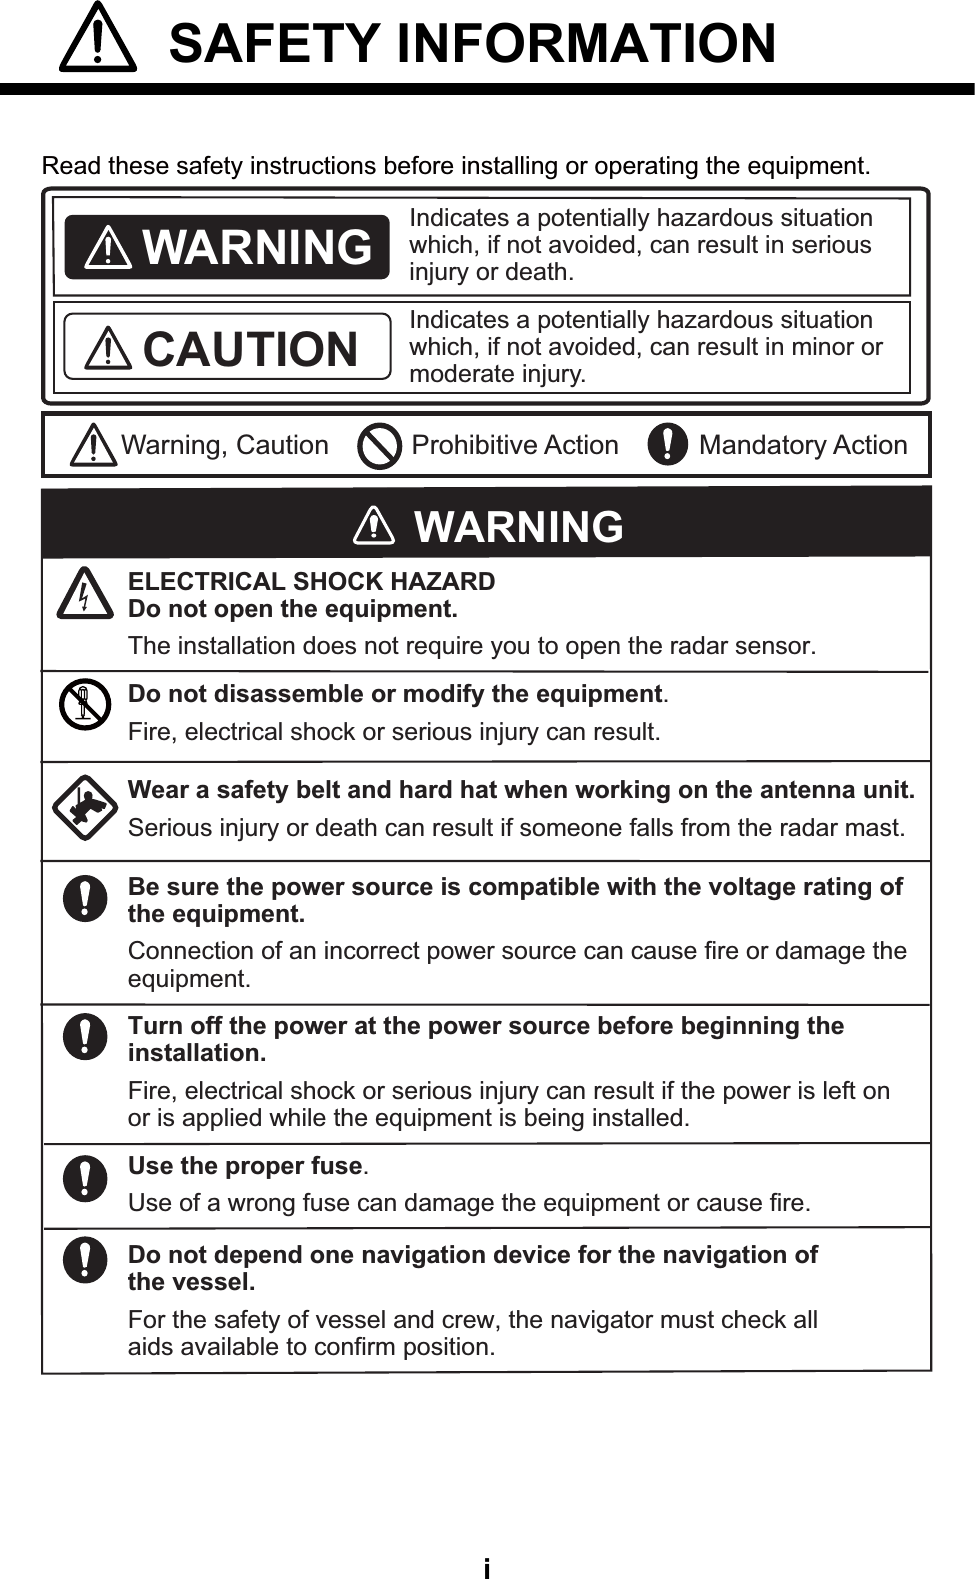 i SAFETY INFORMATION  Read these safety instructions before installing or operating the equipment.WARNINGIndicates a potentially hazardous situation which, if not avoided, can result in minor or moderate injury. Warning, Caution Prohibitive ActionCAUTION Mandatory ActionIndicates a potentially hazardous situation which, if not avoided, can result in serious injury or death. Wear a safety belt and hard hat when working on the antenna unit.Serious injury or death can result if someone falls from the radar mast.ELECTRICAL SHOCK HAZARDDo not open the equipment.The installation does not require you to open the radar sensor.Be sure the power source is compatible with the voltage rating of the equipment.Connection of an incorrect power source can cause fire or damage the equipment.Turn off the power at the power source before beginning the installation.Fire, electrical shock or serious injury can result if the power is left on or is applied while the equipment is being installed.WARNINGDo not disassemble or modify the equipment.Fire, electrical shock or serious injury can result.Use the proper fuse.Use of a wrong fuse can damage the equipment or cause fire.Do not depend one navigation device for the navigation of the vessel.For the safety of vessel and crew, the navigator must check all aids available to confirm position.